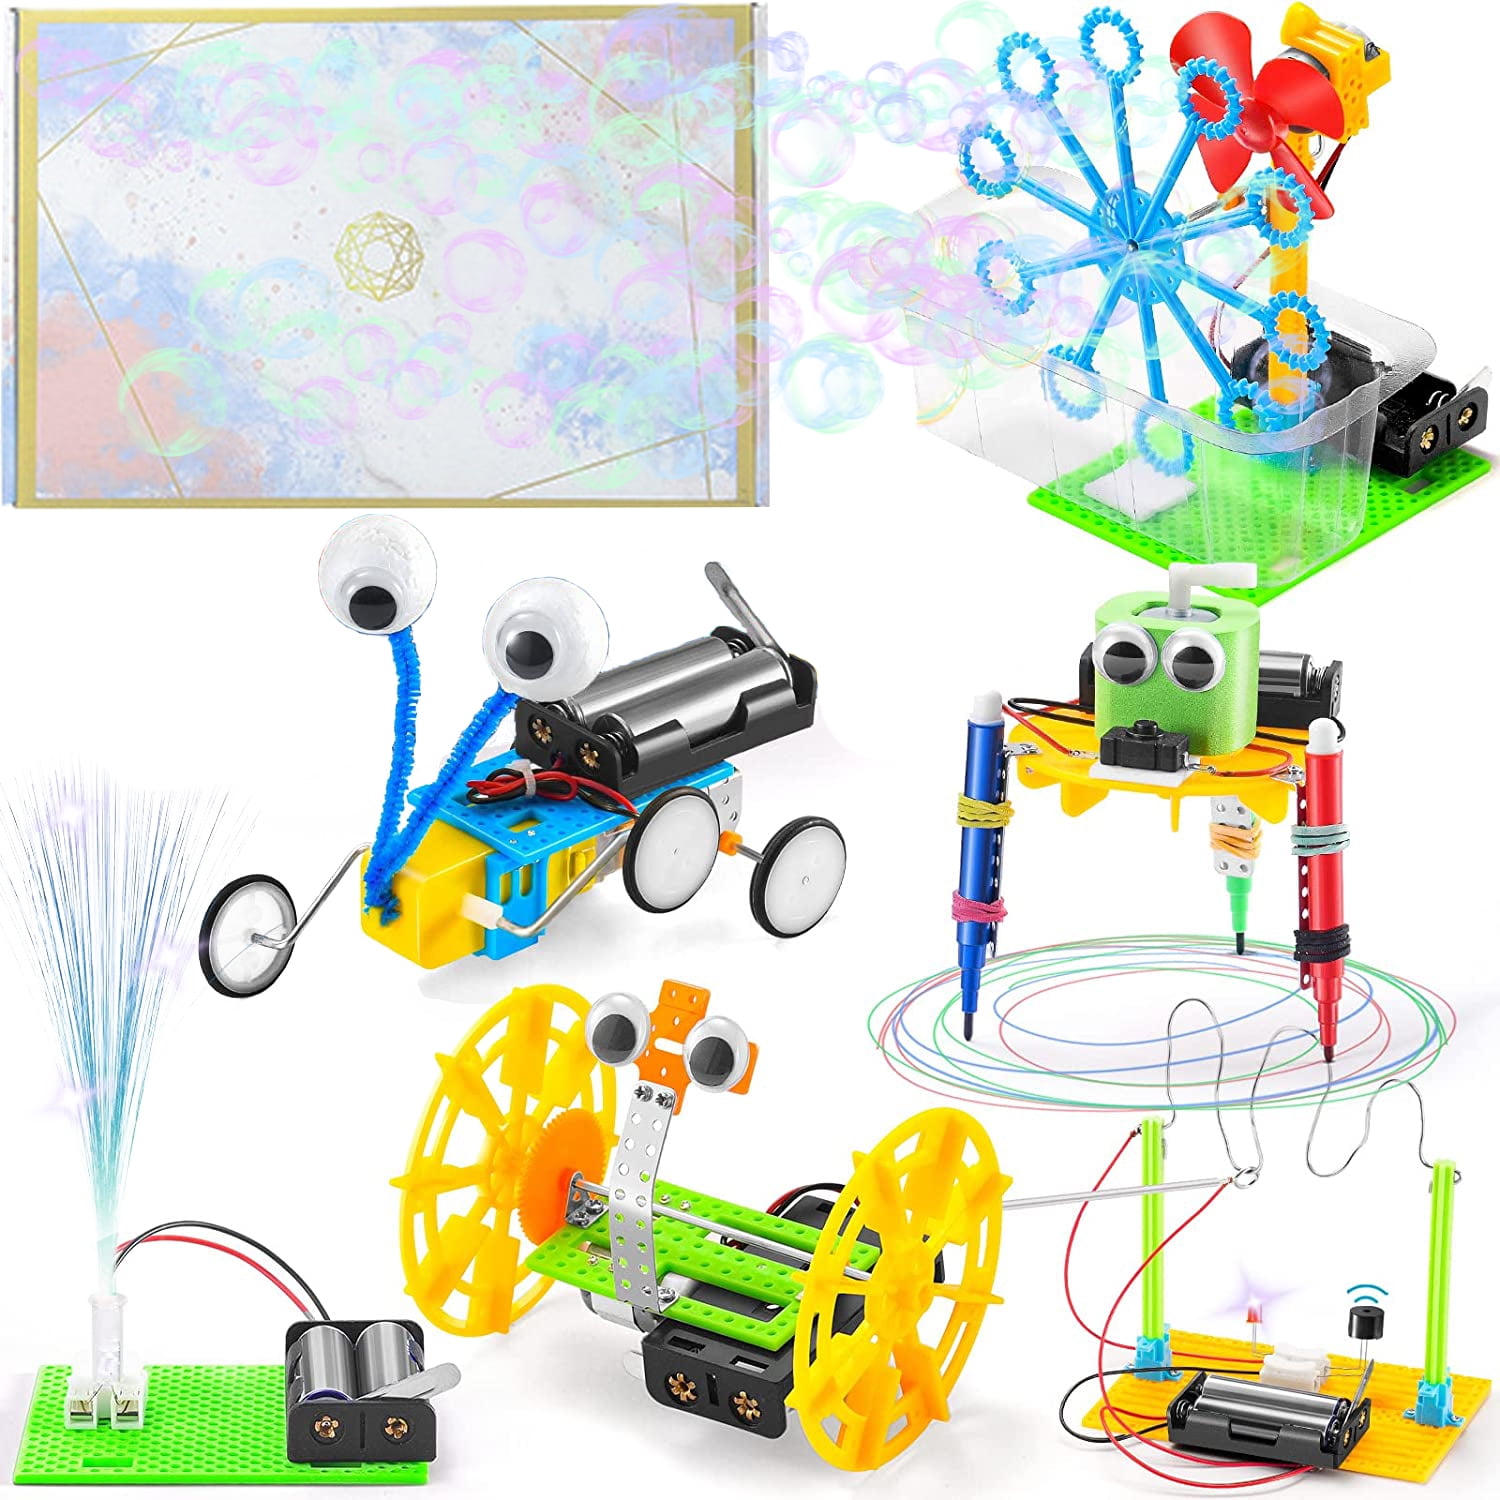  Thames & Kosmos Kids First Robot Engineer STEM Experiment Kit  for Young Learners, Build 10 Non-Motorized Robots, Play & Learn with  Storybook Manual